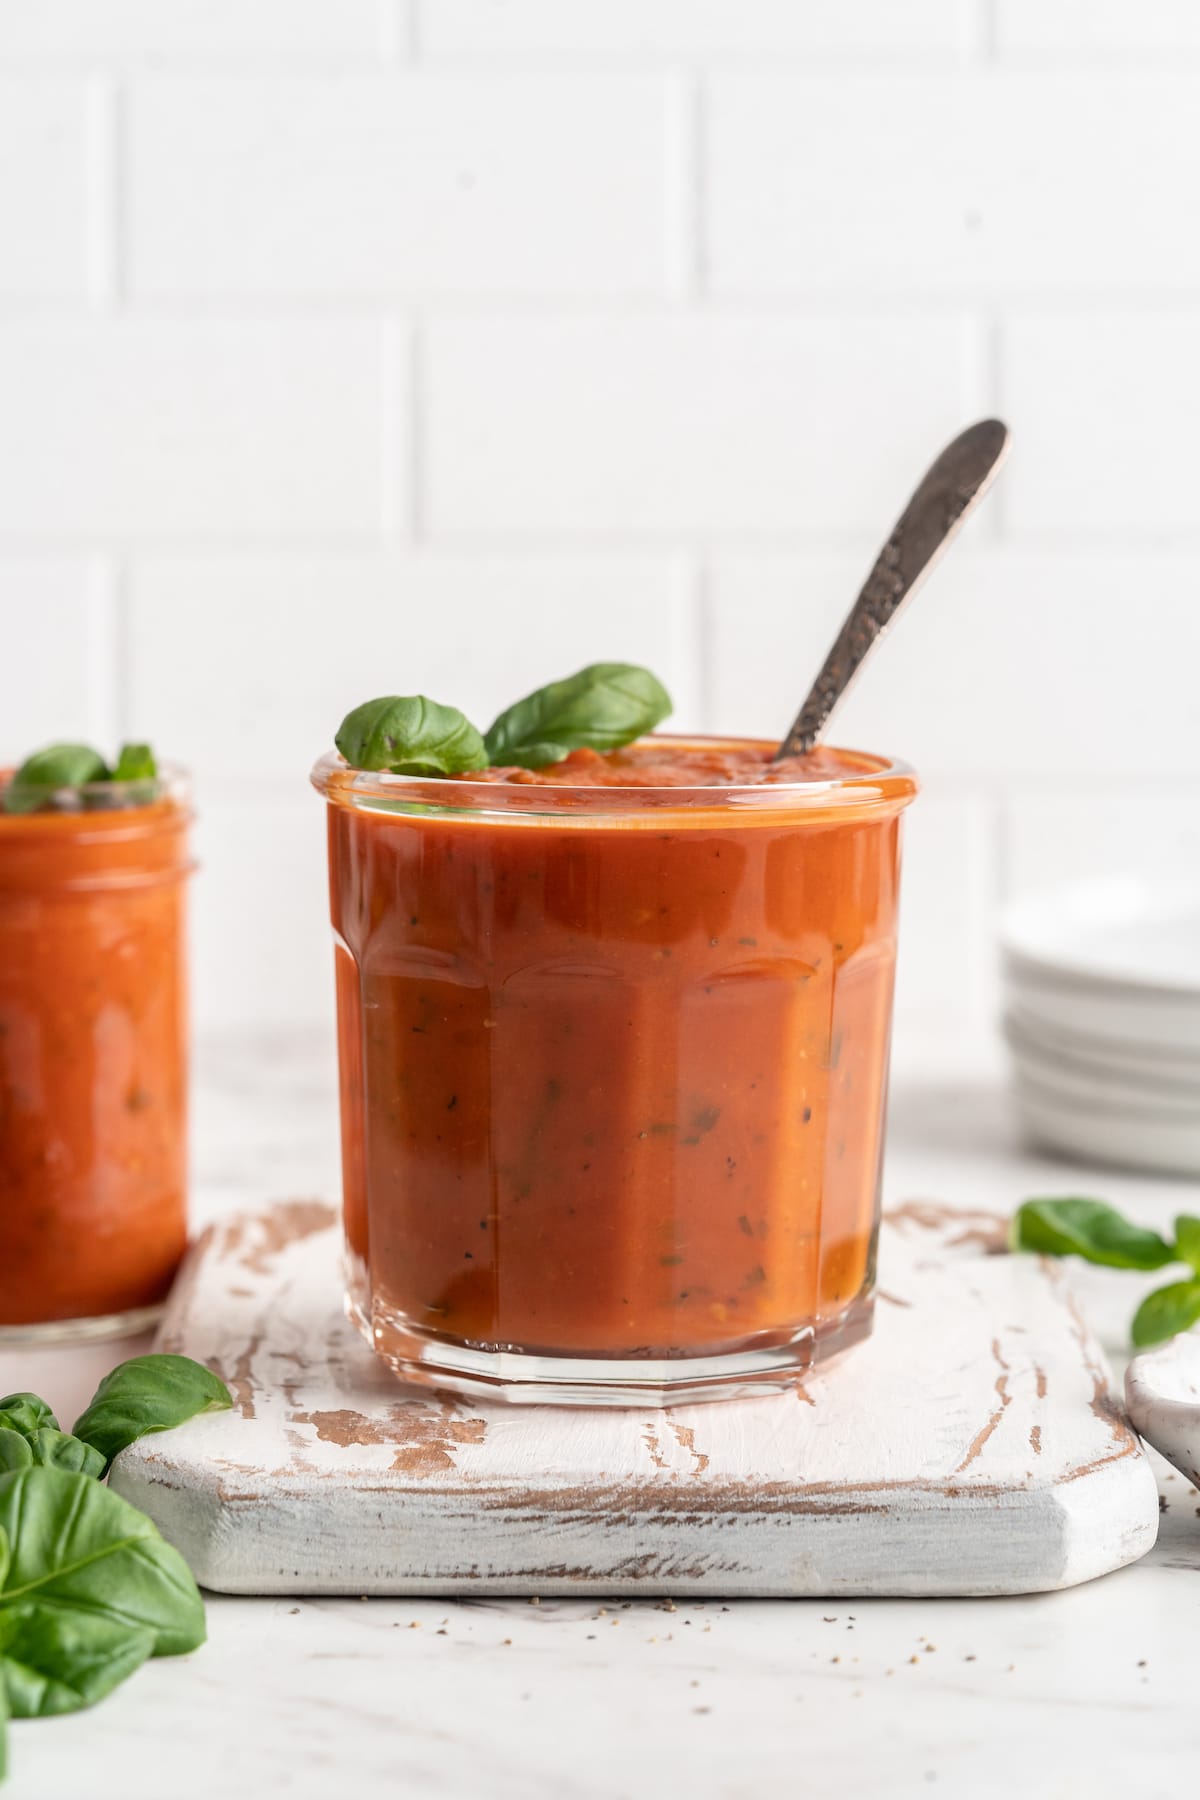 Jar of tomato sauce with spoon